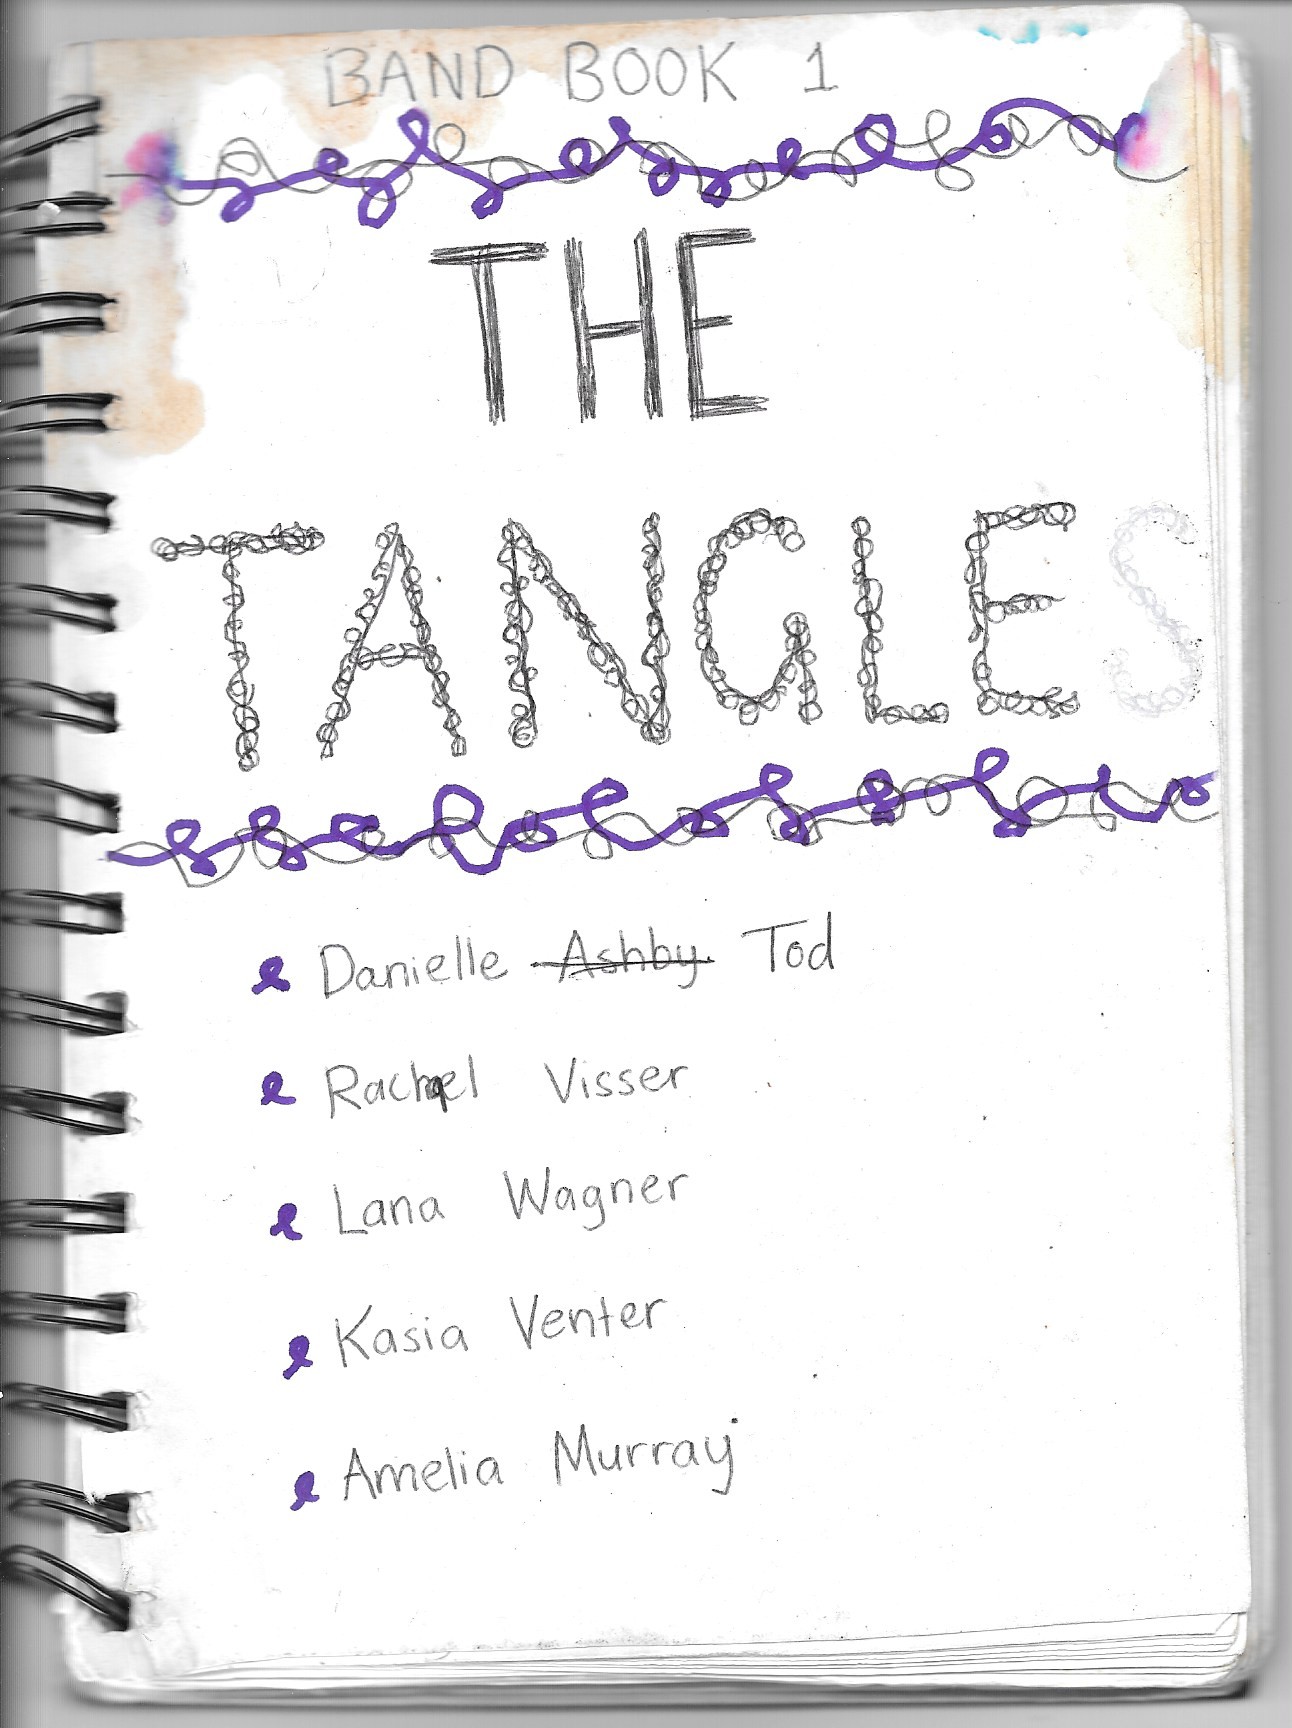 Hand-drawn cover page featuring names of the band members